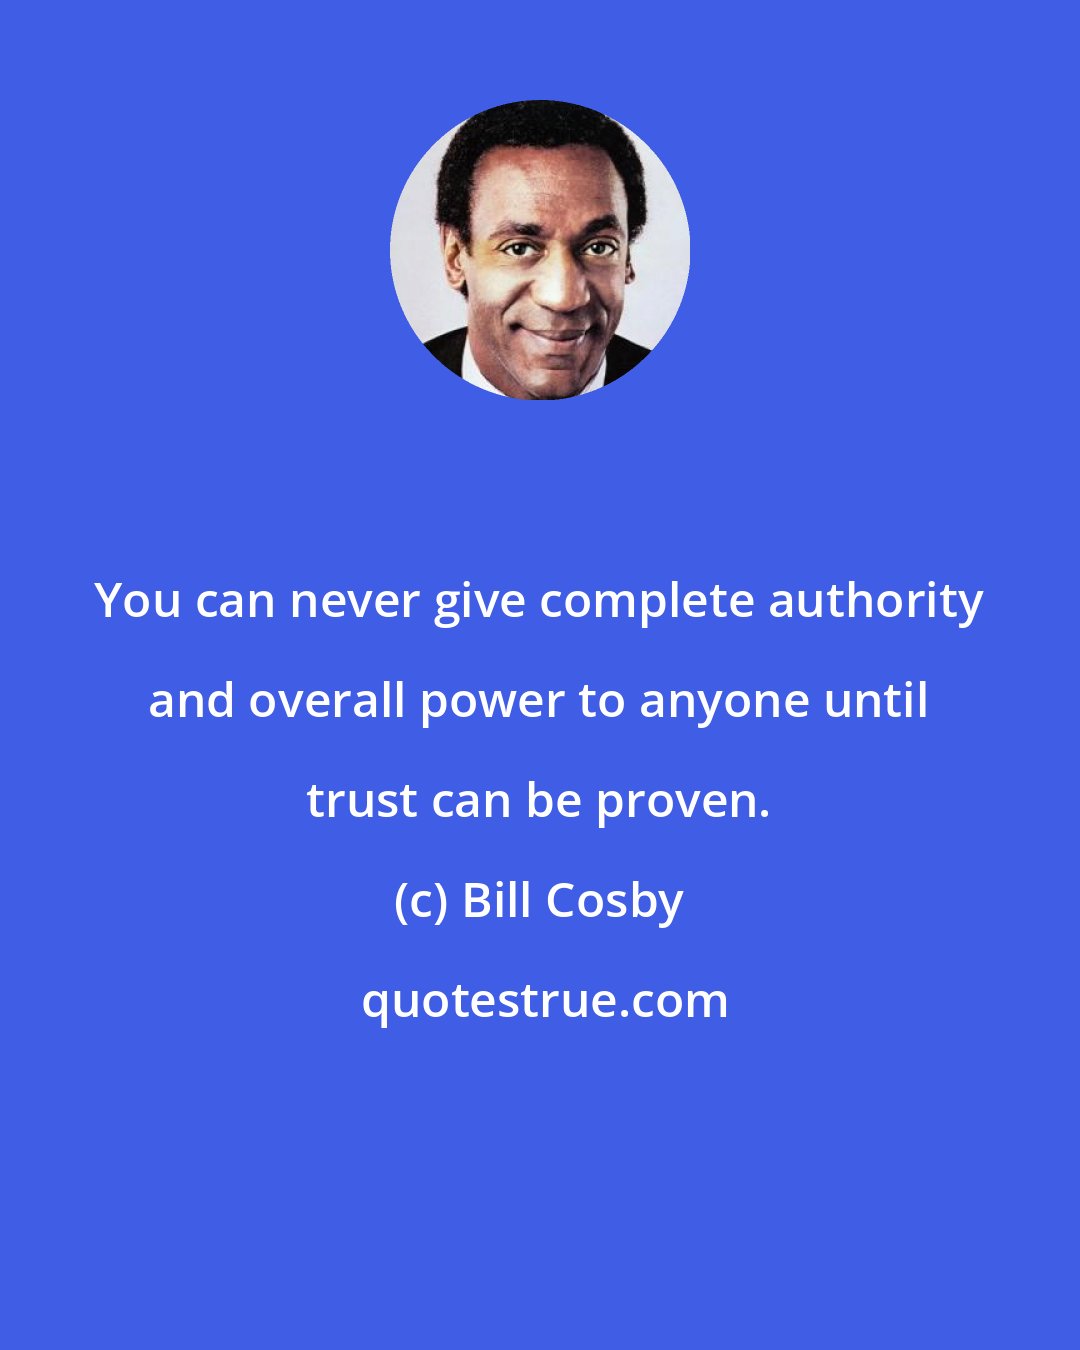 Bill Cosby: You can never give complete authority and overall power to anyone until trust can be proven.